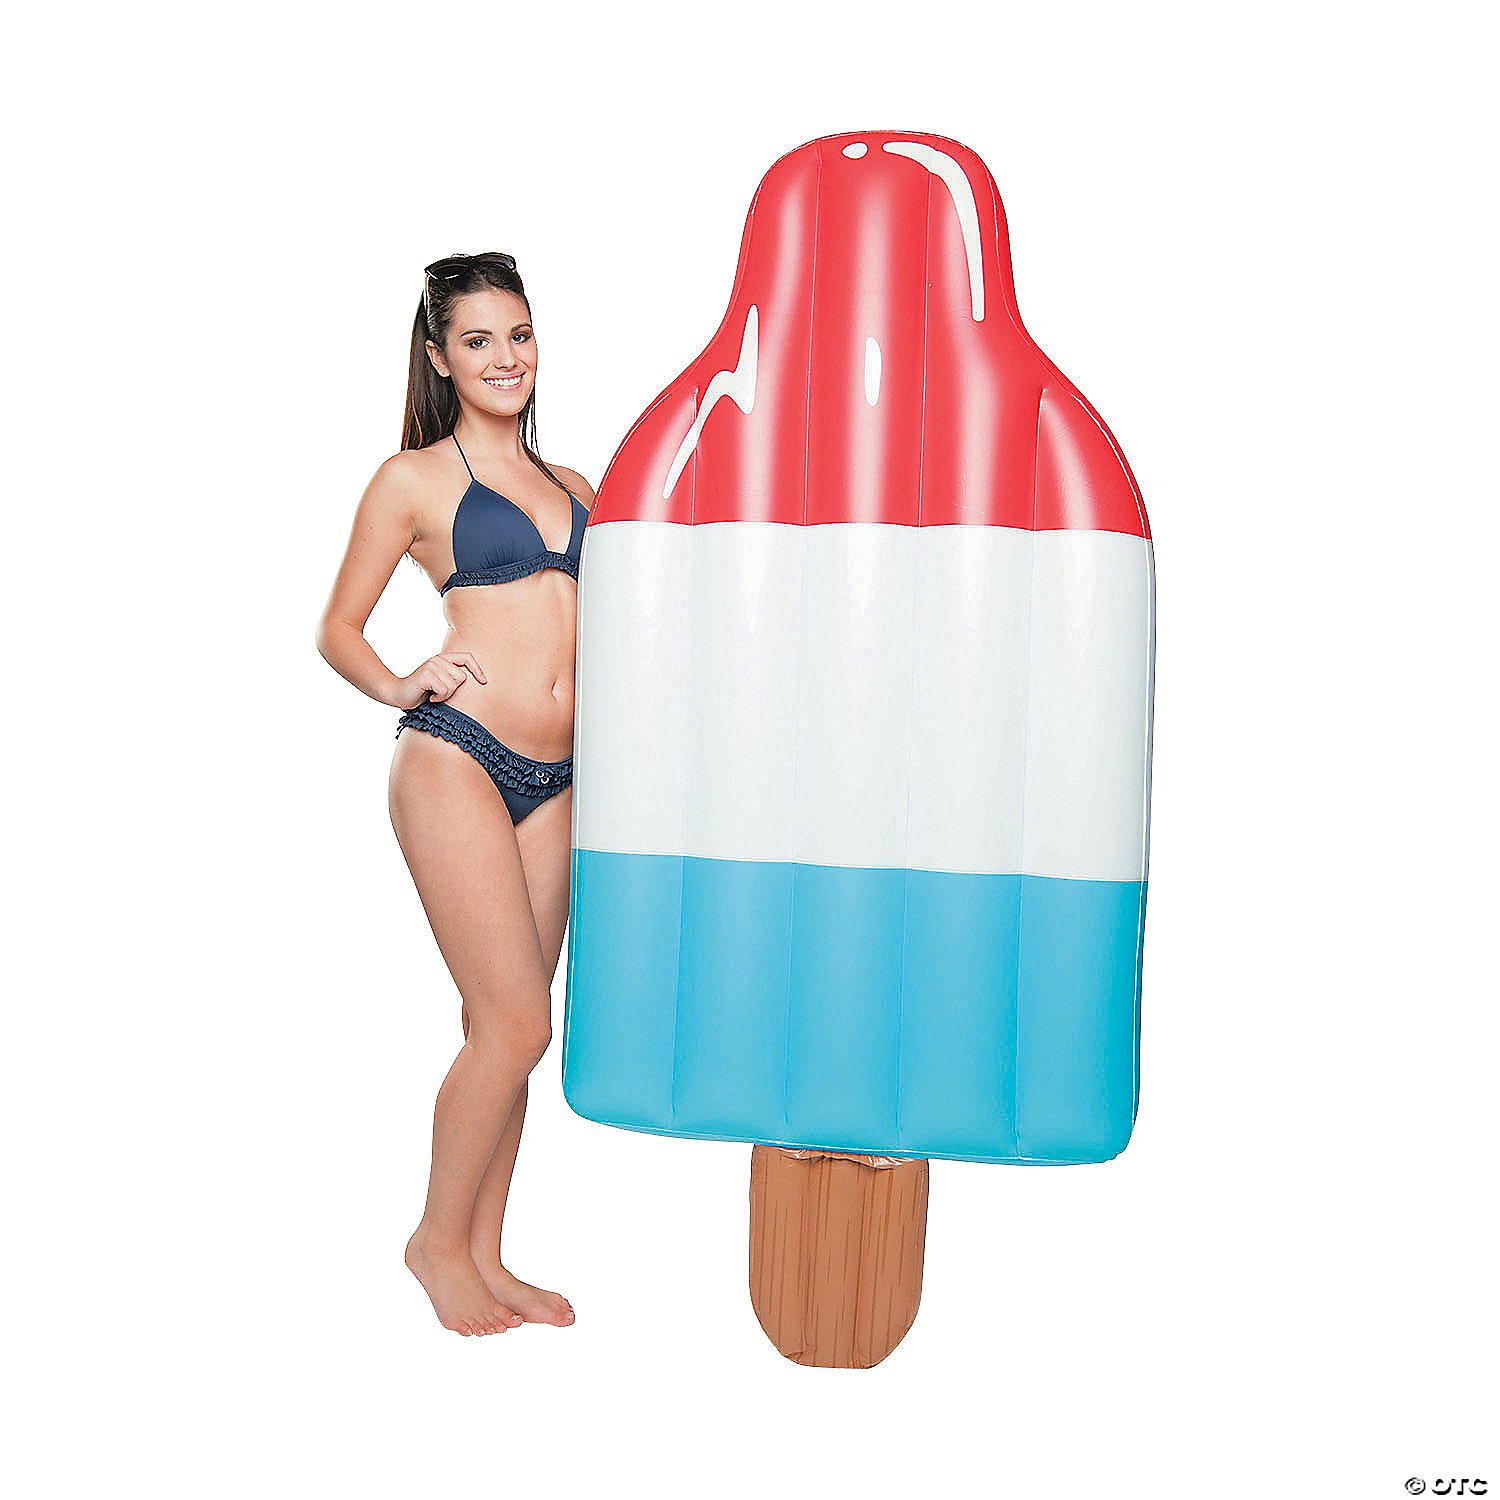 Details about  / Giant ice cream cone pool float 60x36 RHINOMASTER play new summer inflatable